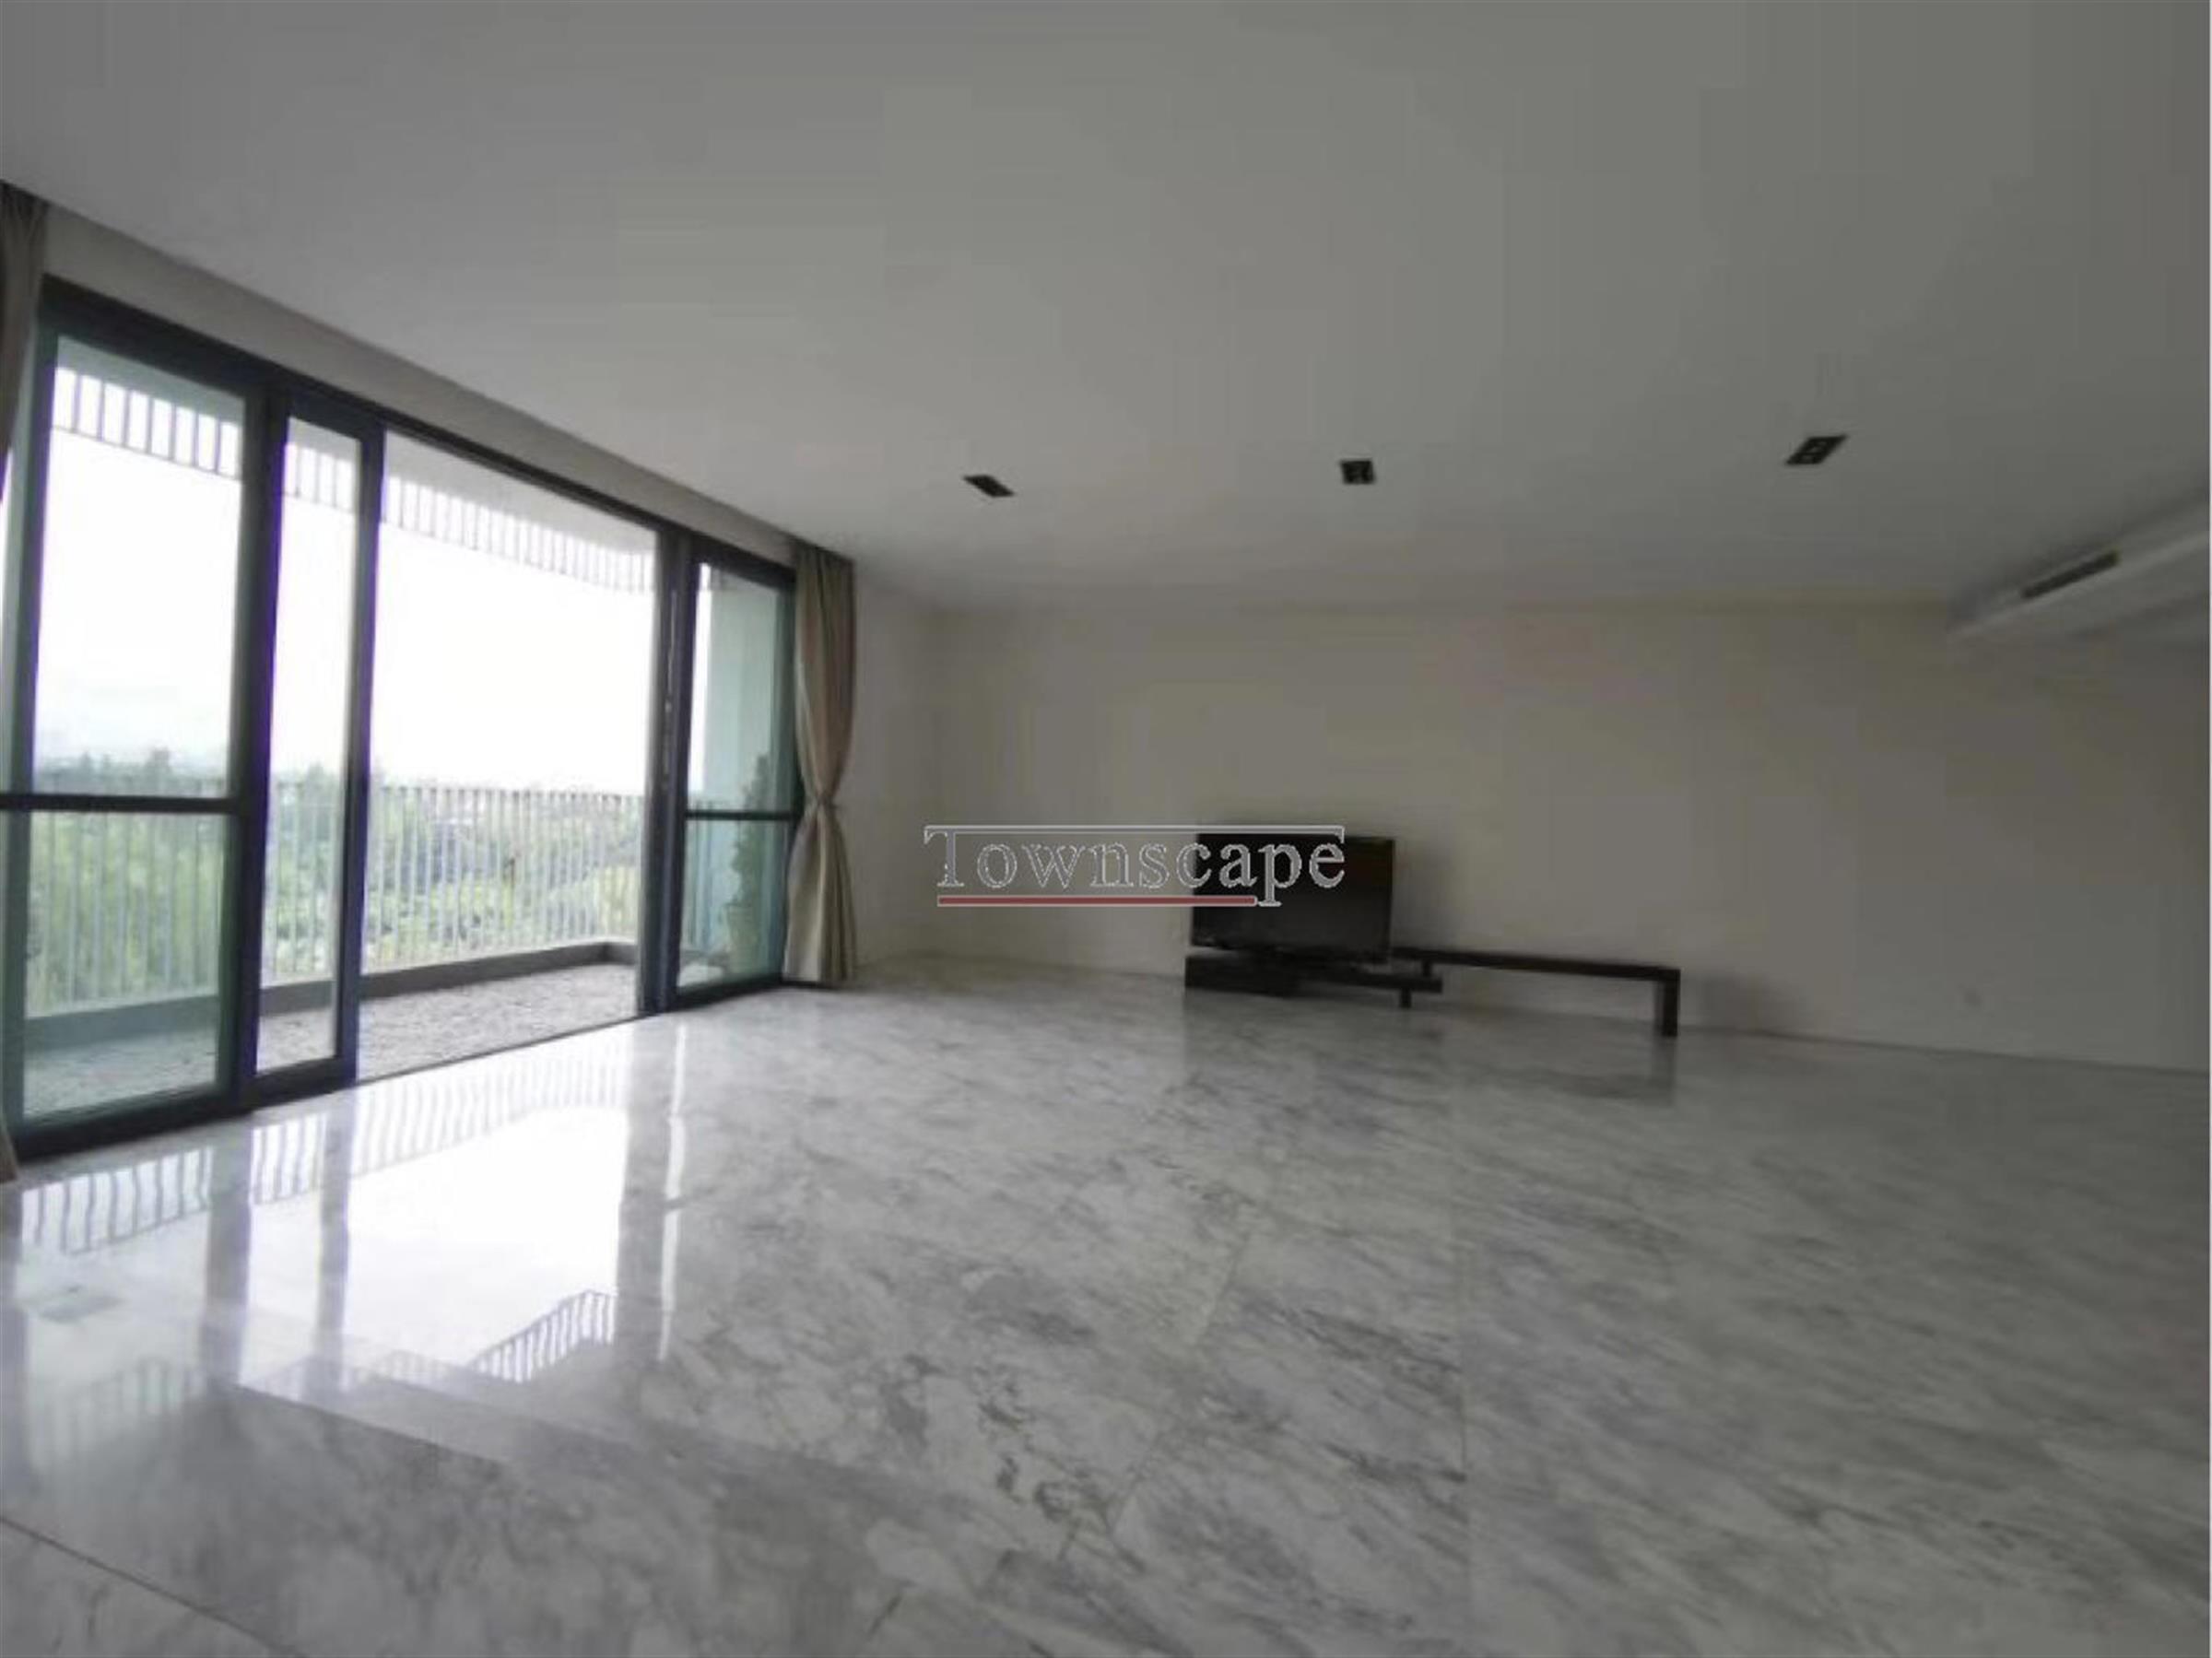 marble floors 4BR Lakeside Villas Apartment for Rent near French/German Schools